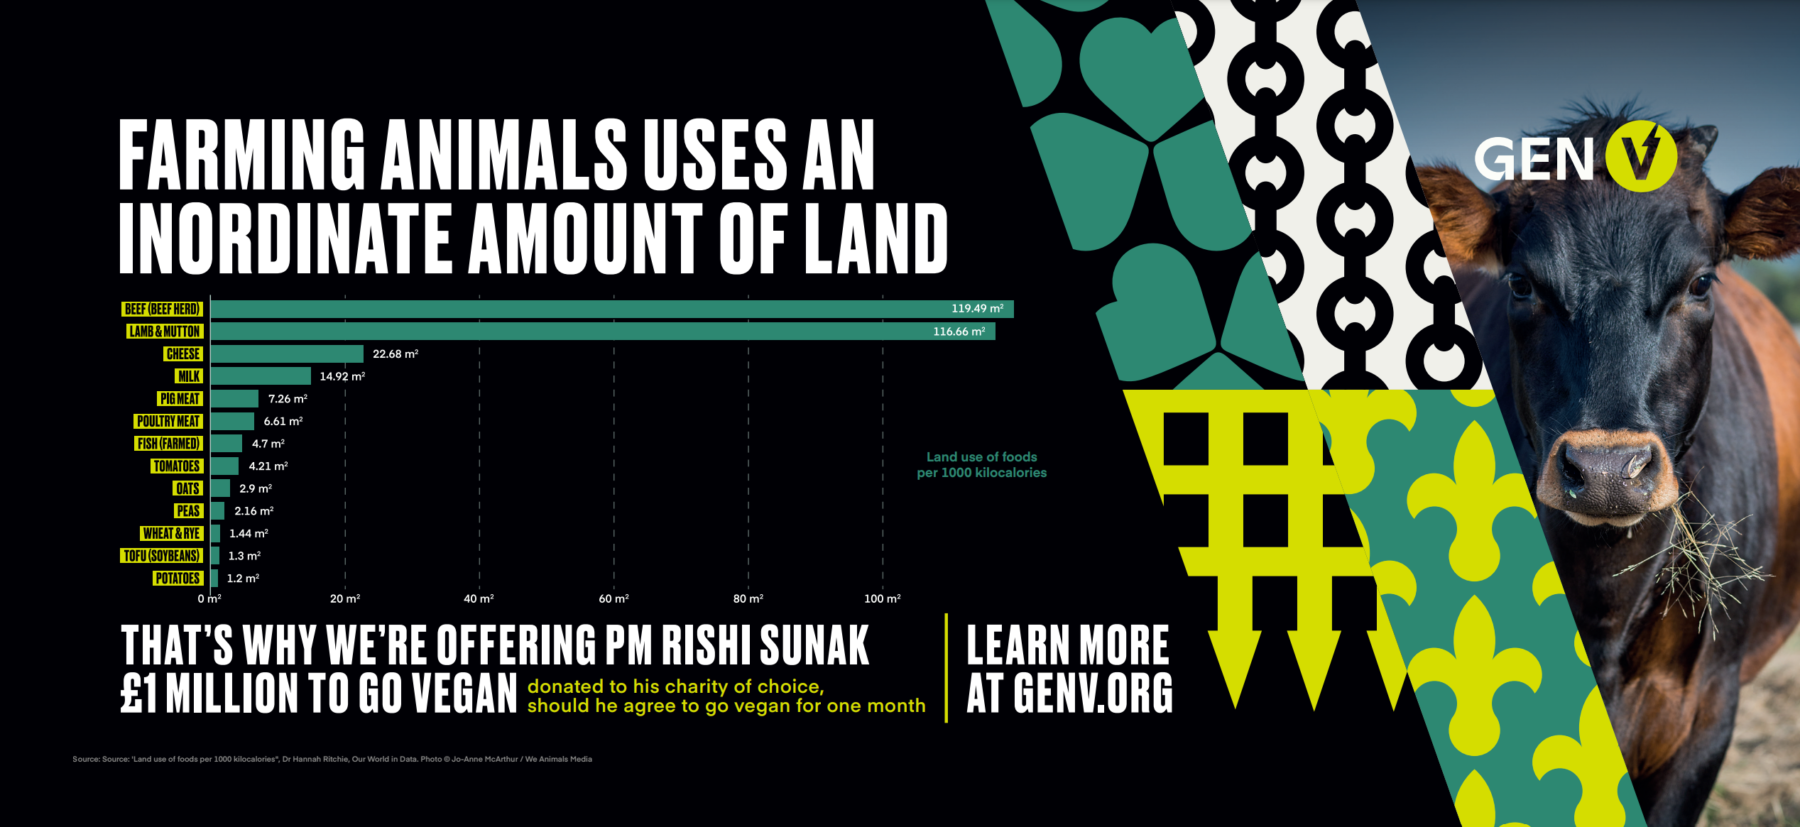 graph of land use for different protein sources. animal products use a lot more than plant proteins